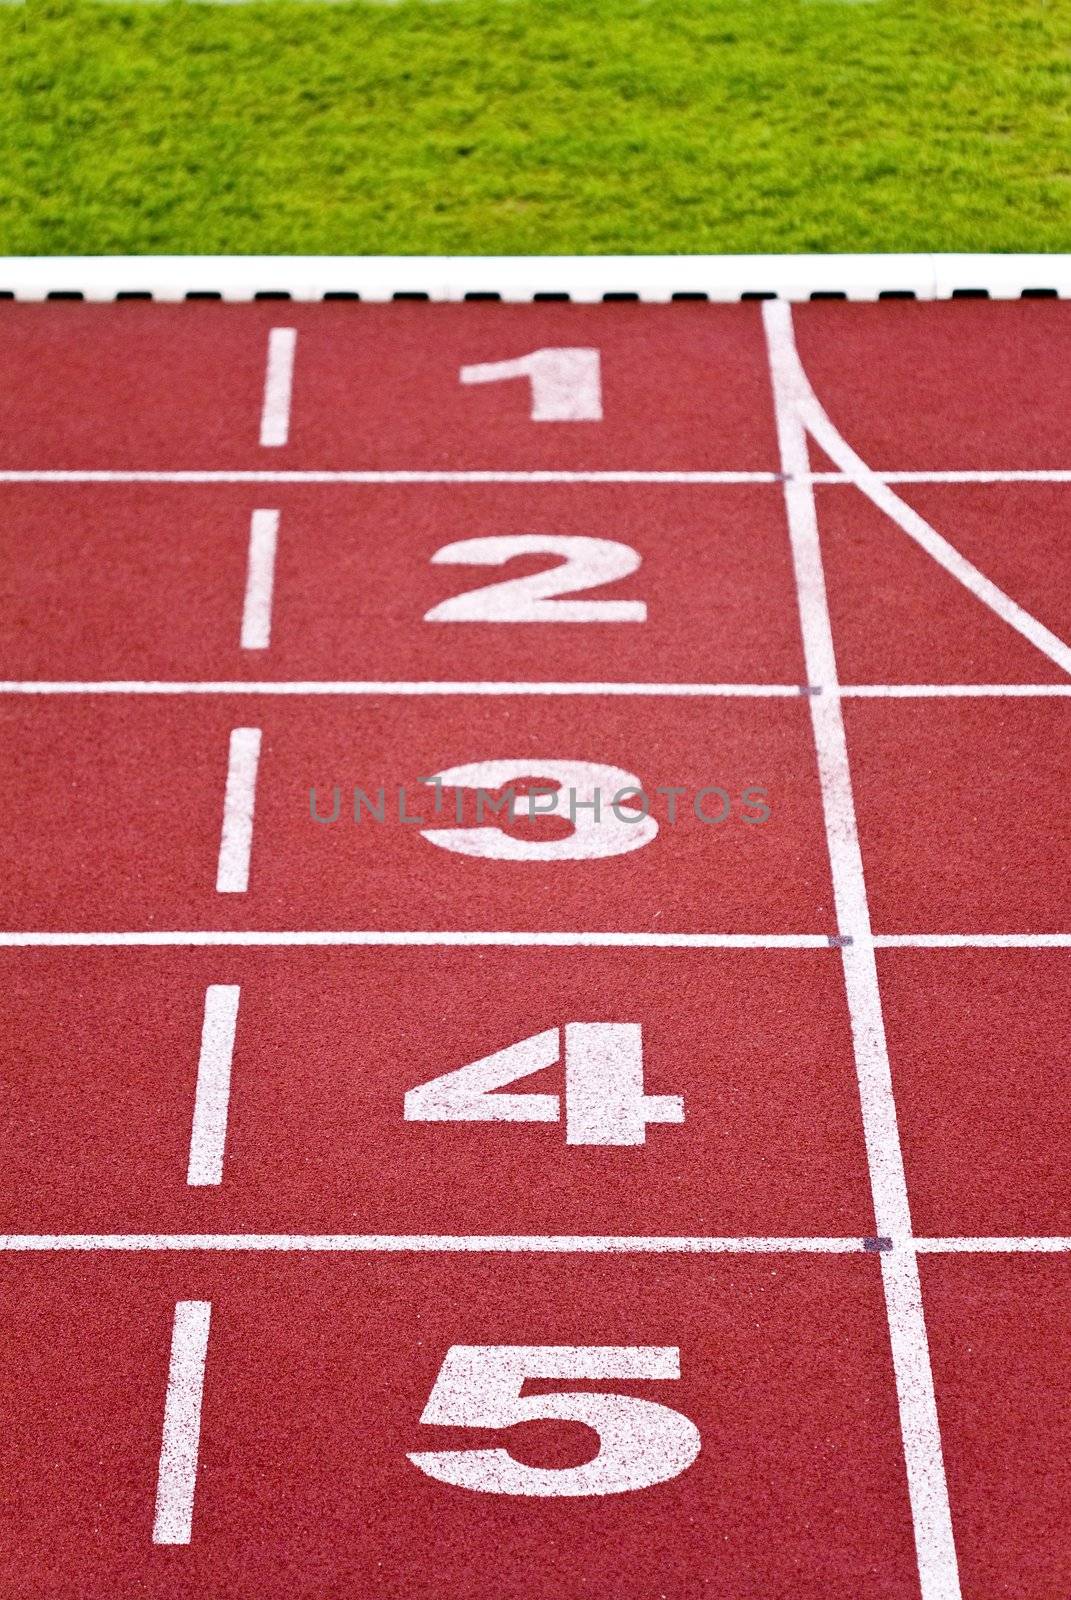 Track lanes, numbers by Gbuglok